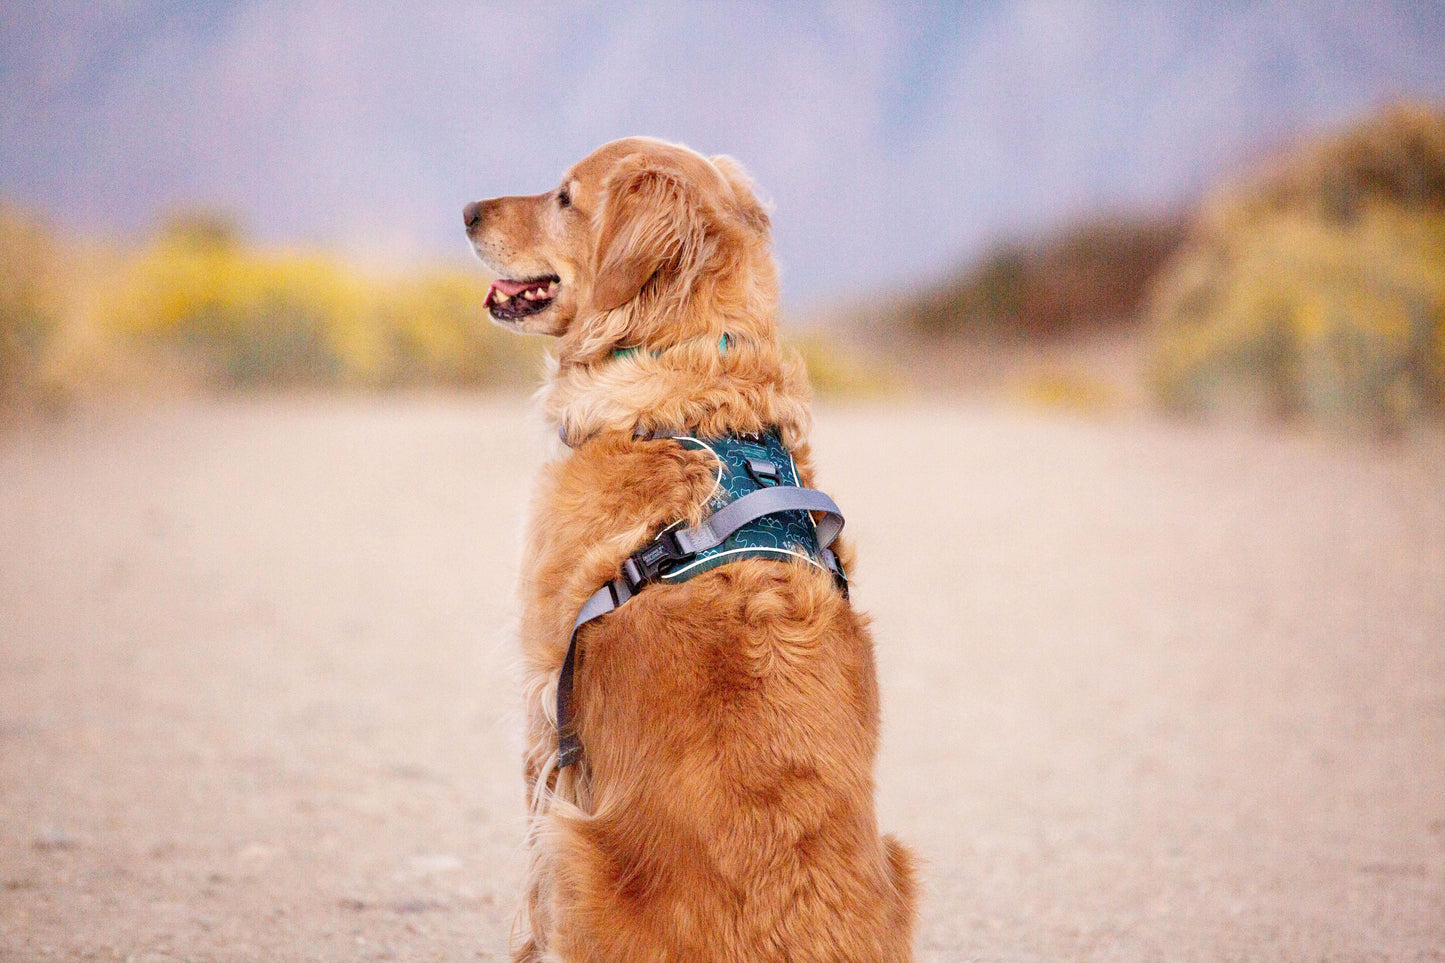 golden retriever dog with utah mountain background with dog harness with handle in teal green color